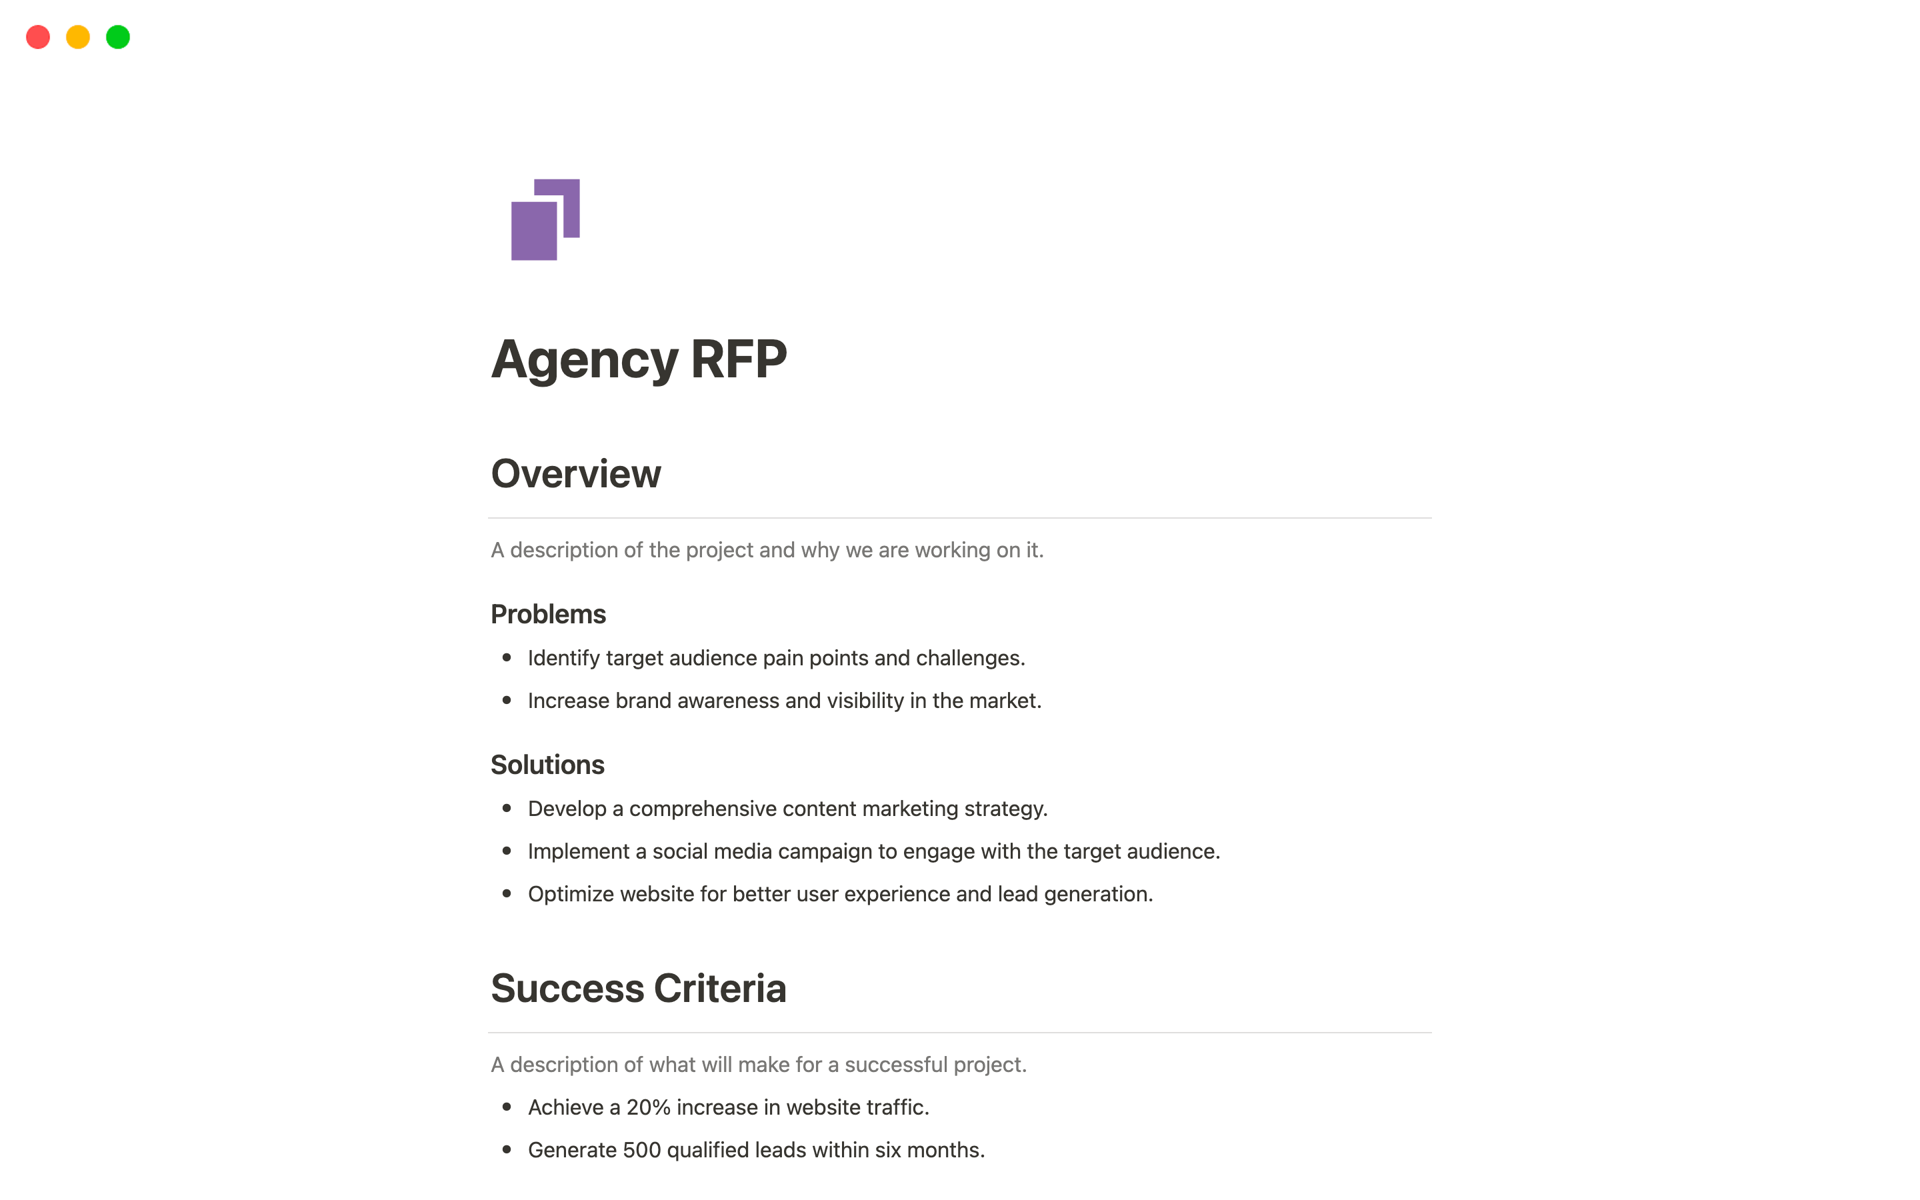 Guide your project's direction and expectations with our focused Agency RFP template.